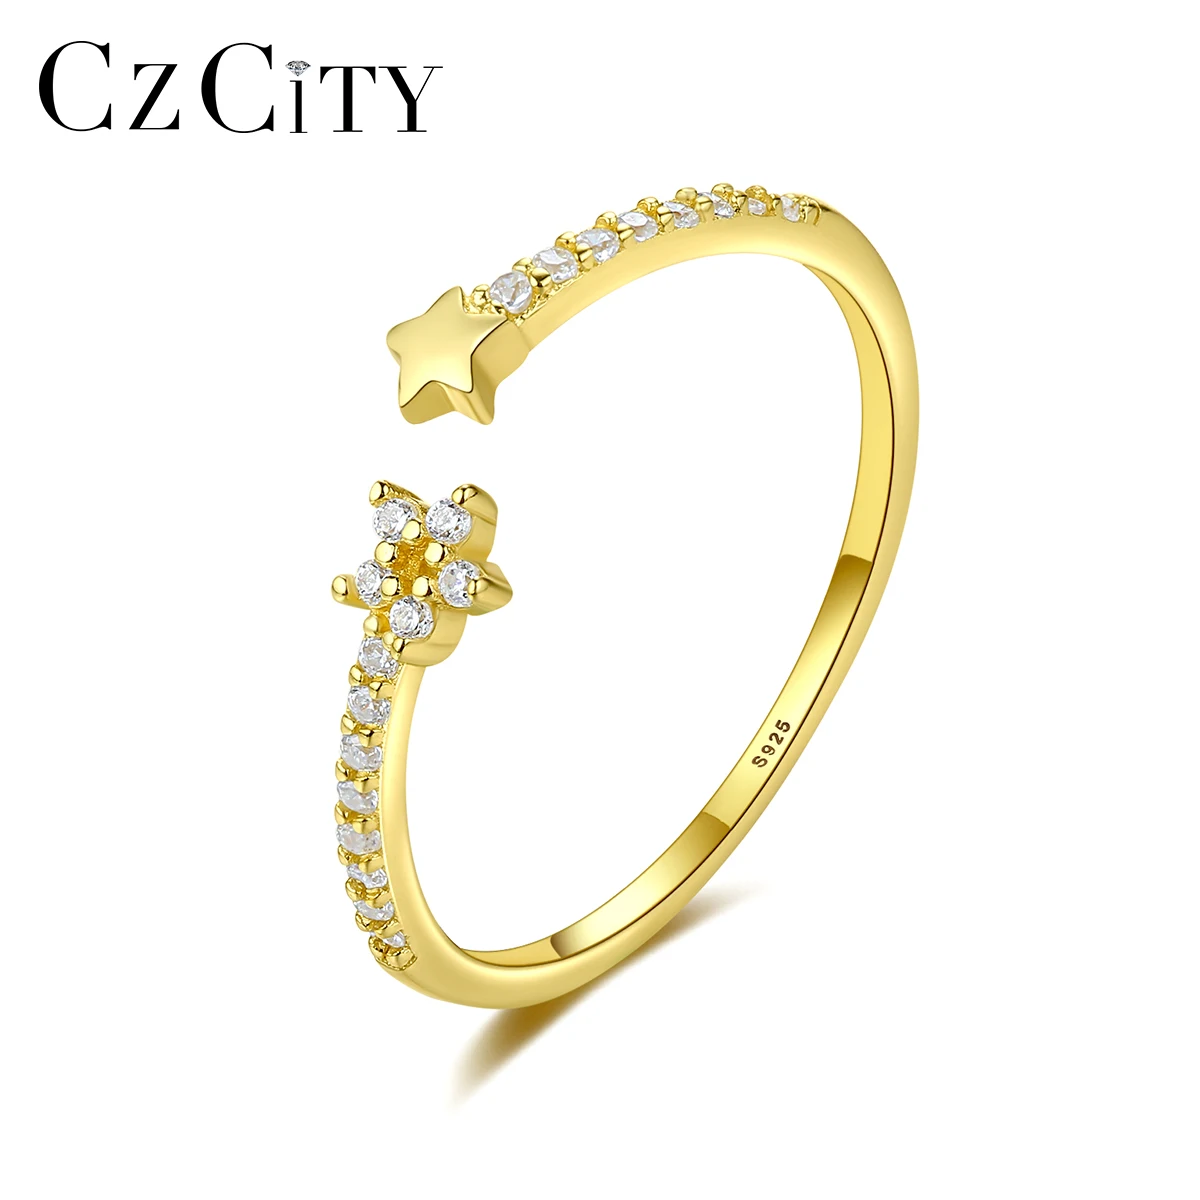 

CZCITY 14K Gold Plated 925 Sterling Silver Cubic Zirconia Star Flower Open Cuff Rings for Women Silver Ring